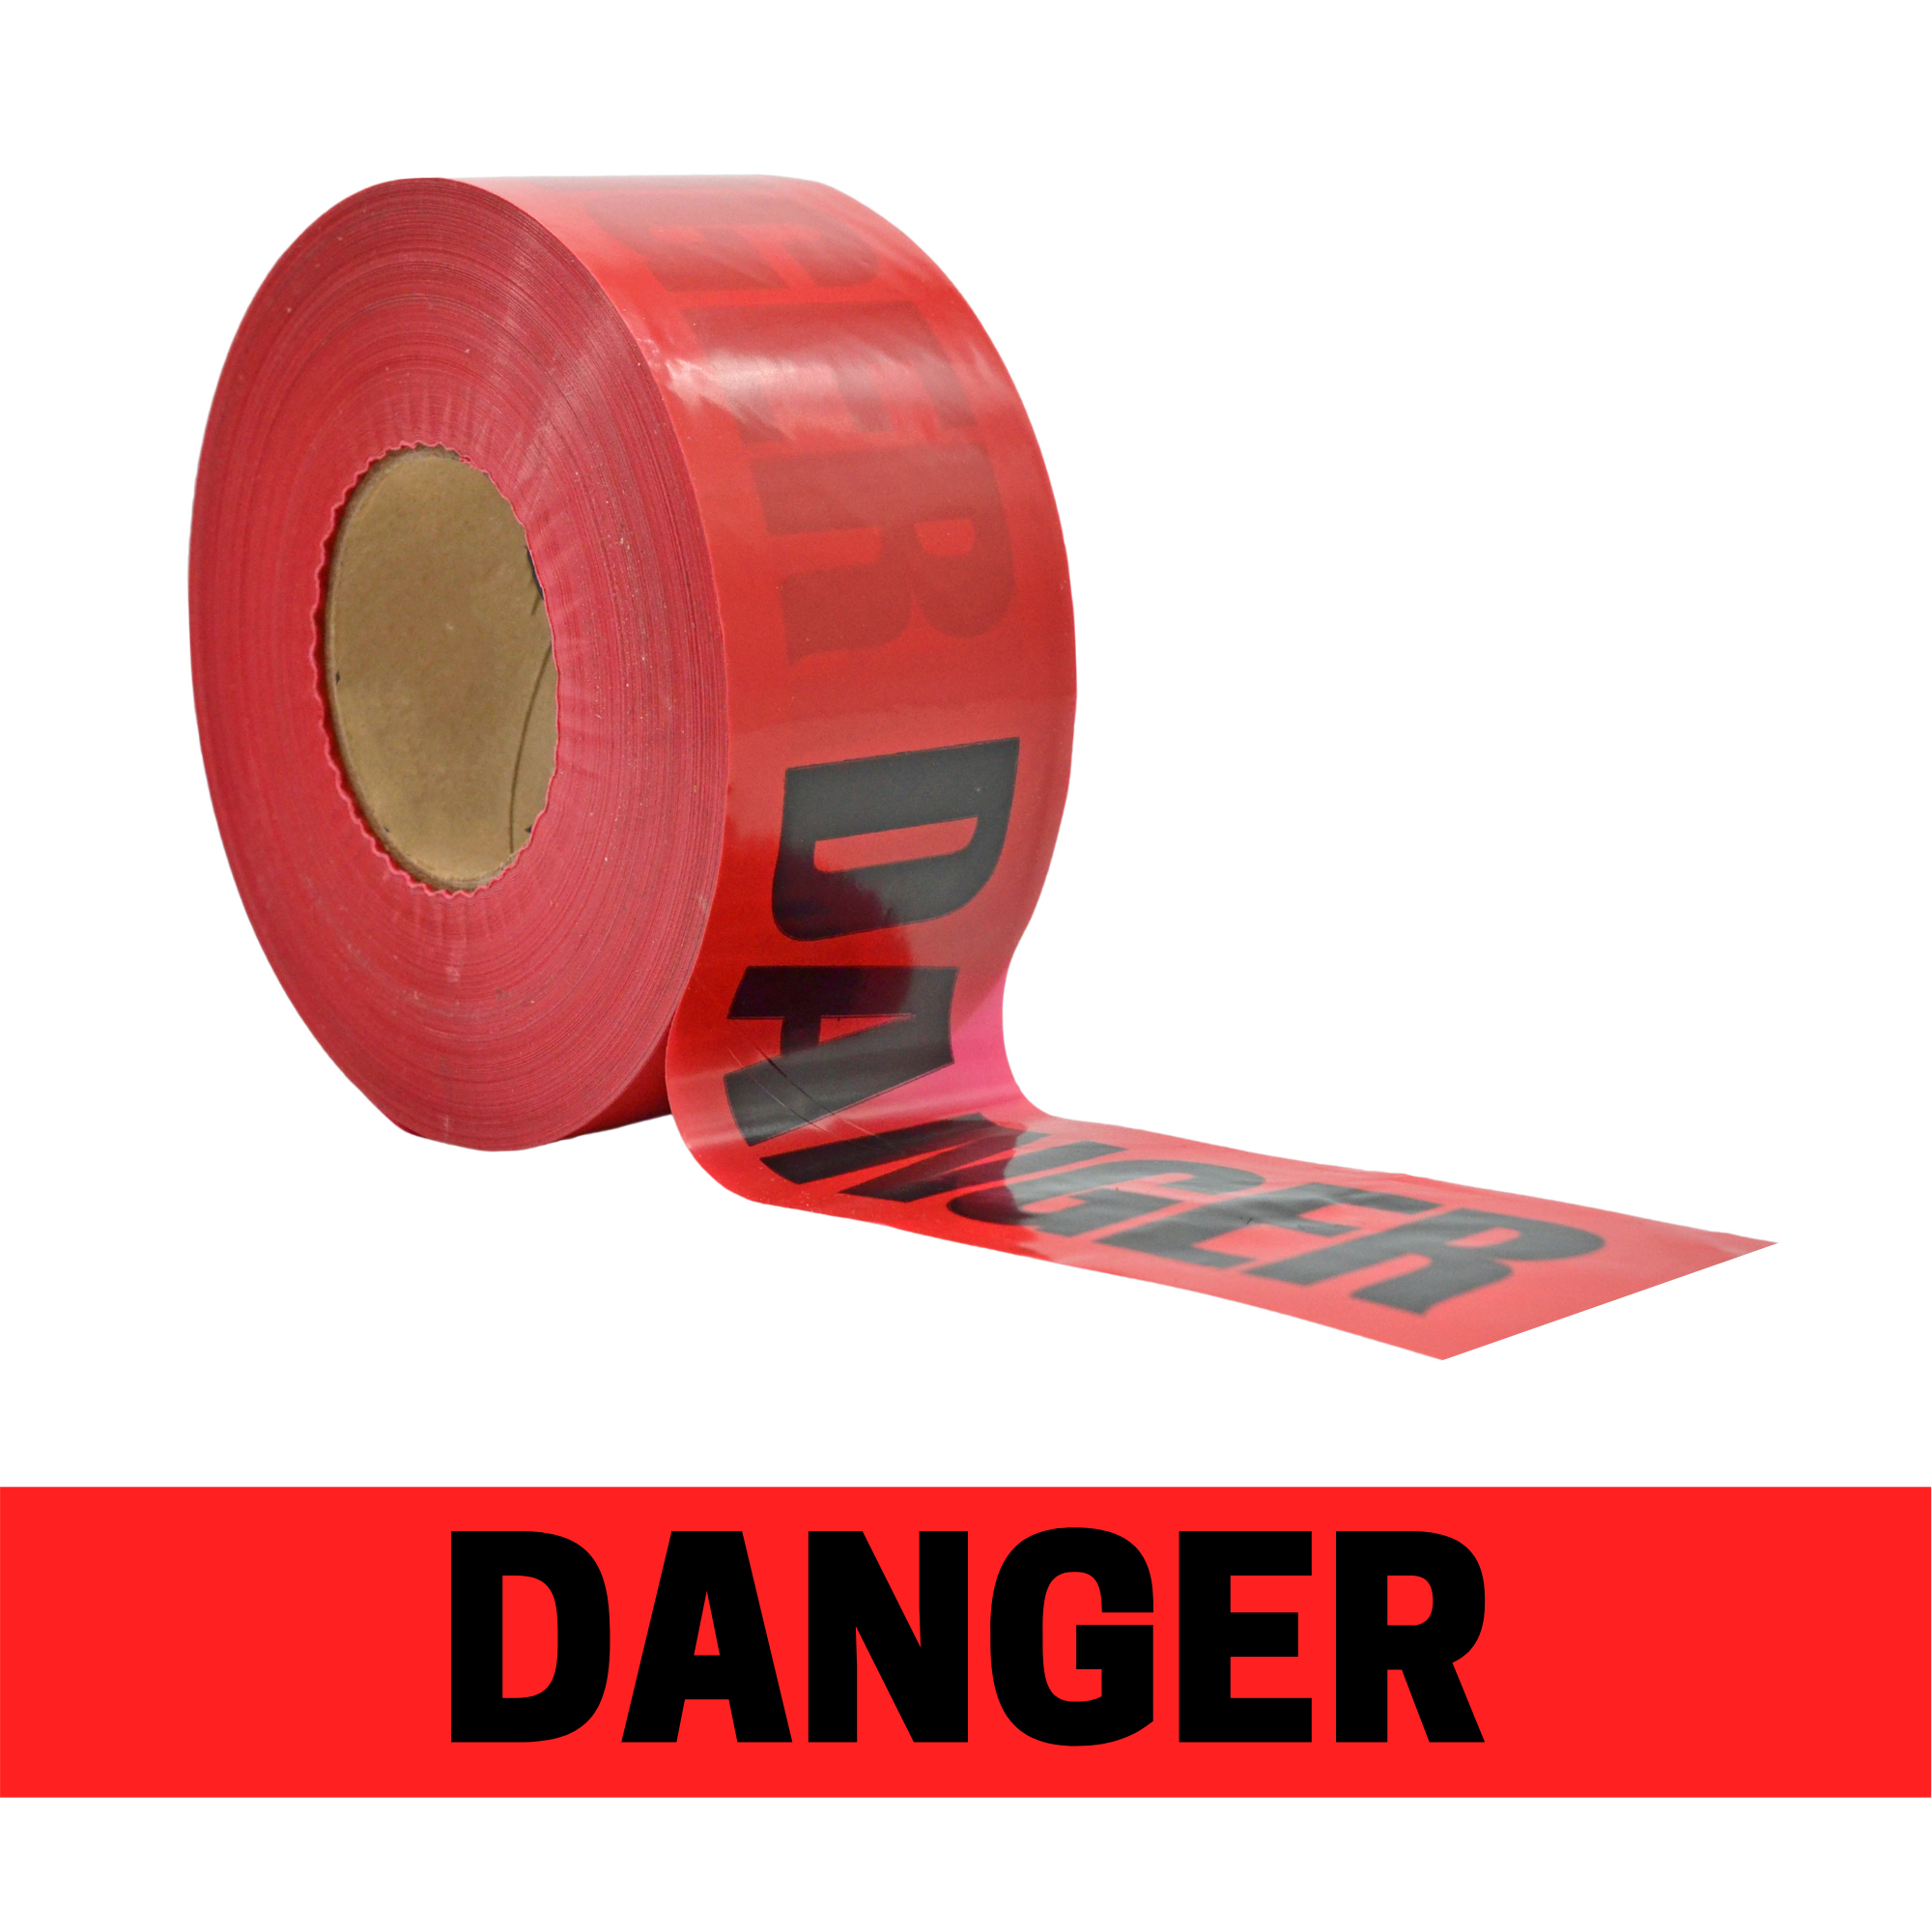 WOD Barricade Flagging Tape ''Danger'' 3 inch x 1000 ft. - Hazardous Areas, Safety for Construction Zones BRC